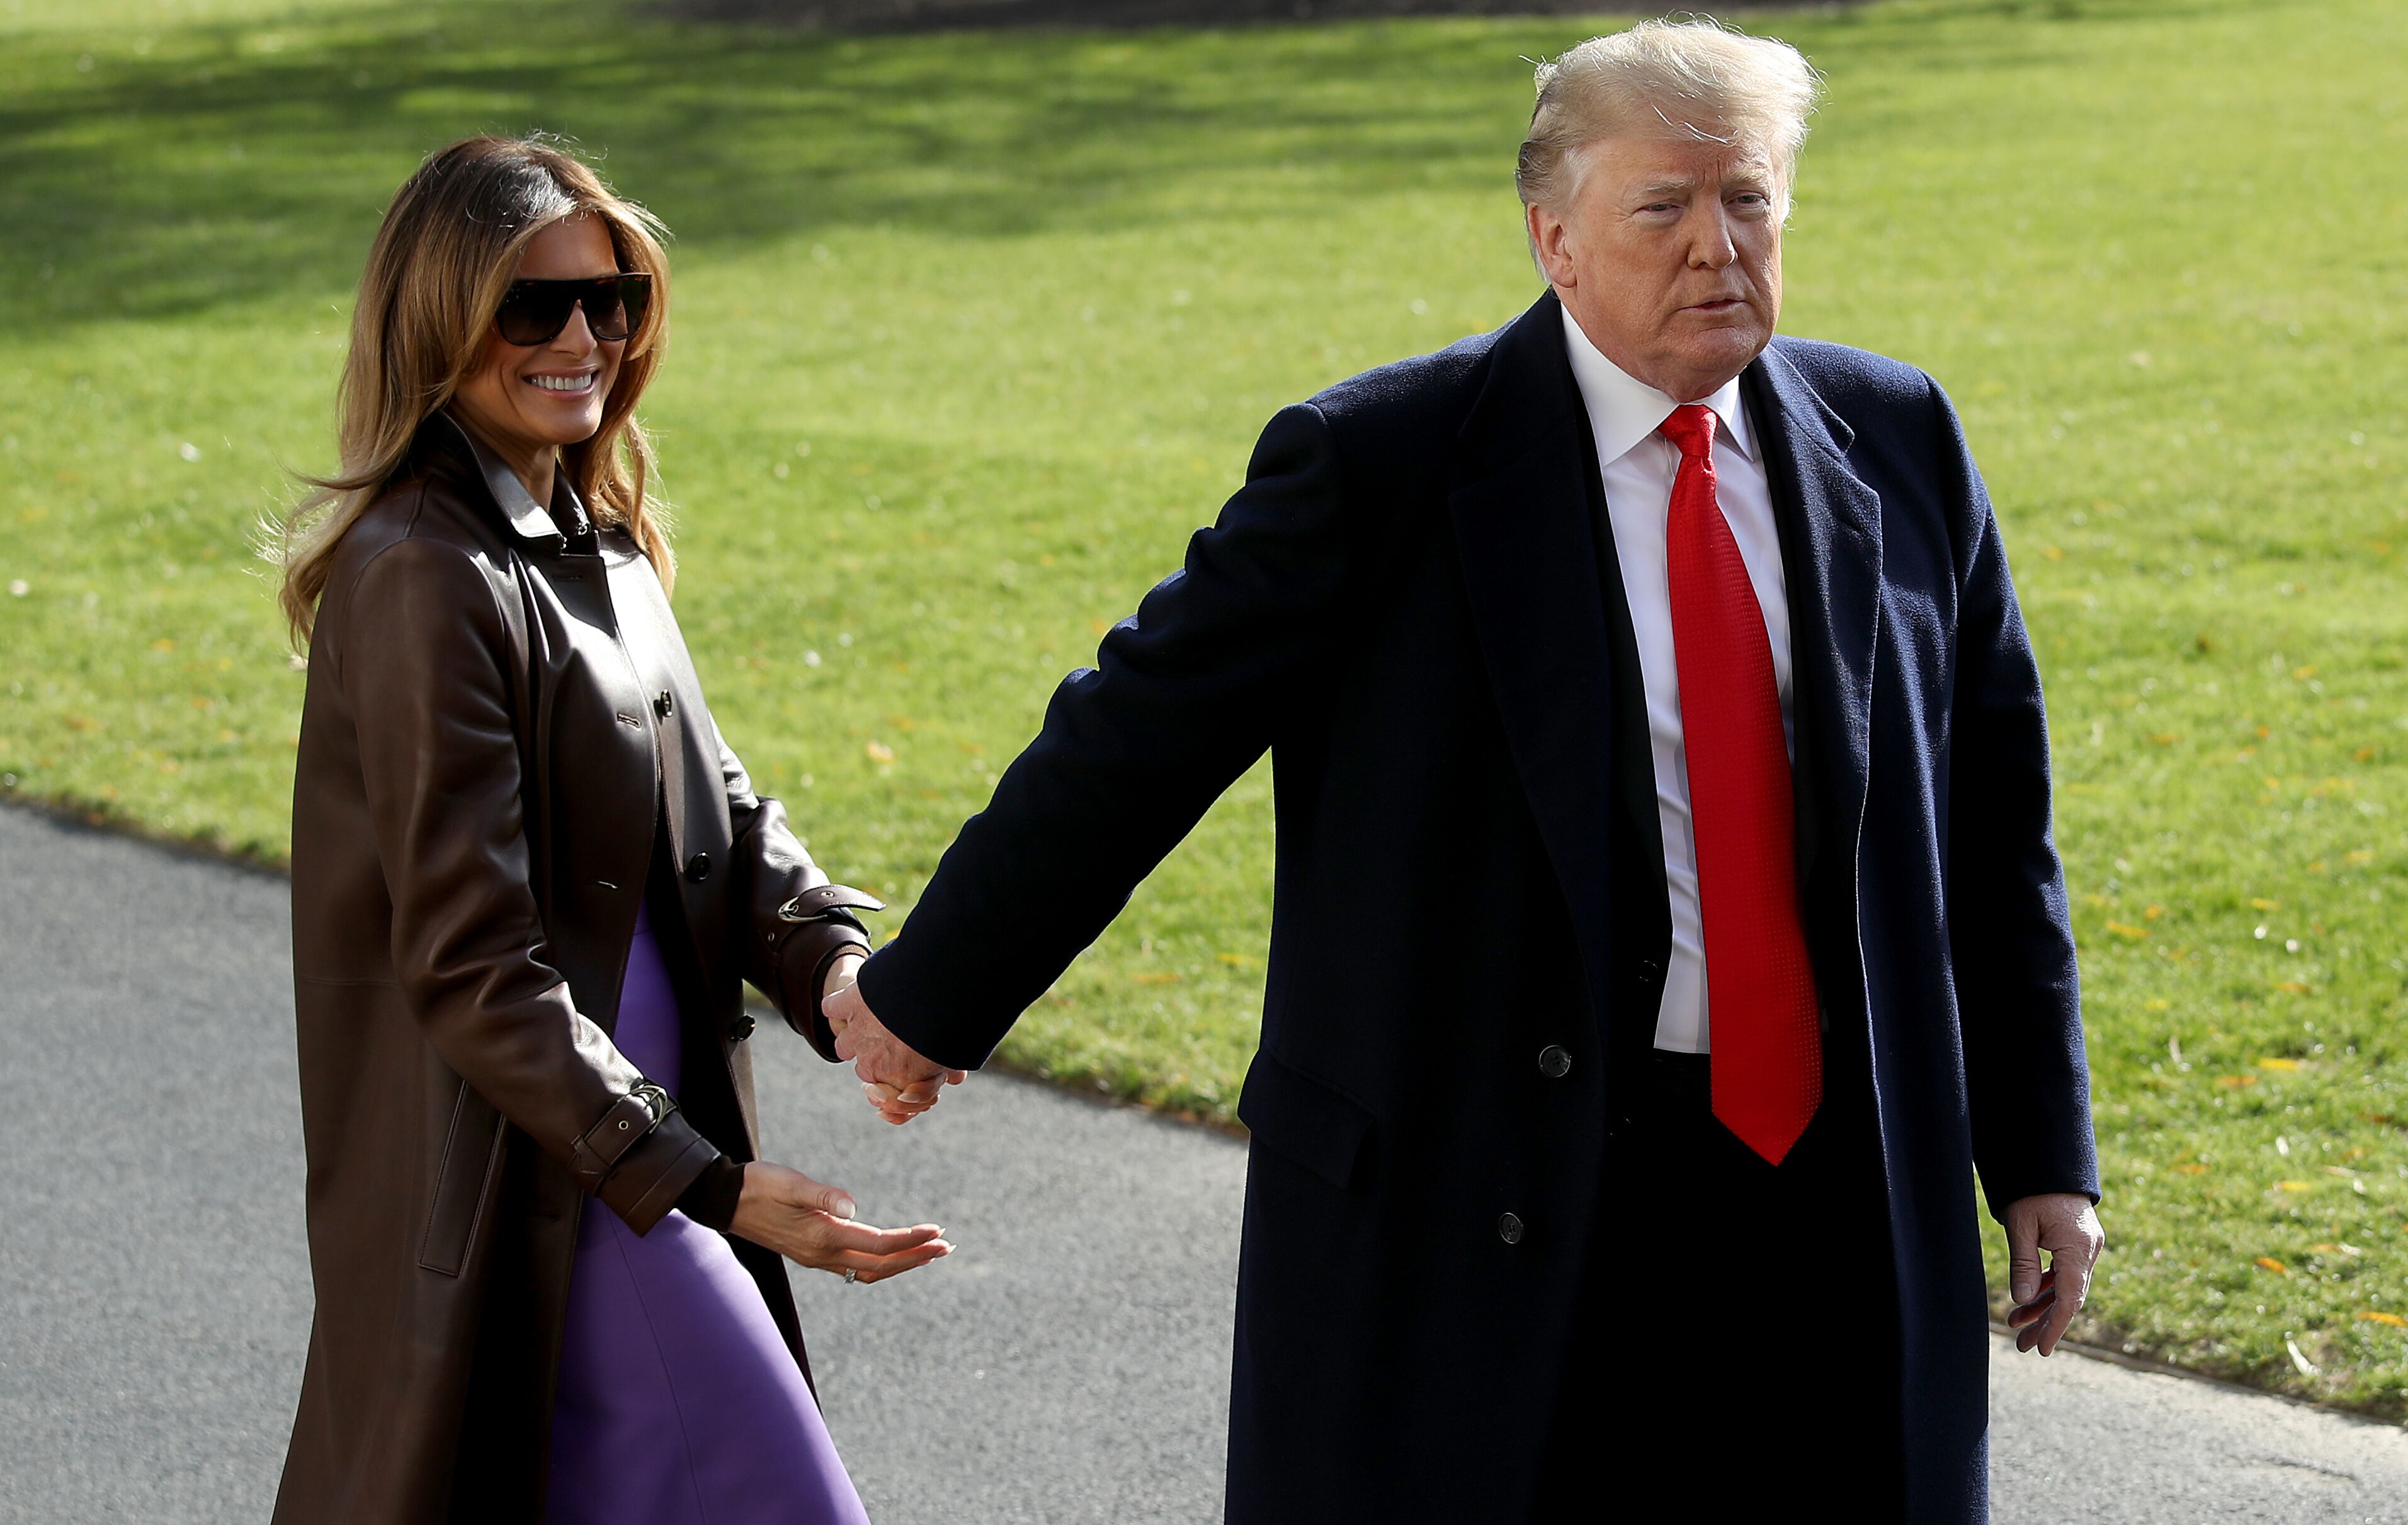  Donald Trump and first lady Melania Trump depart the White House November 29, 2018 in Washington, DC. | Photo: Getty Images